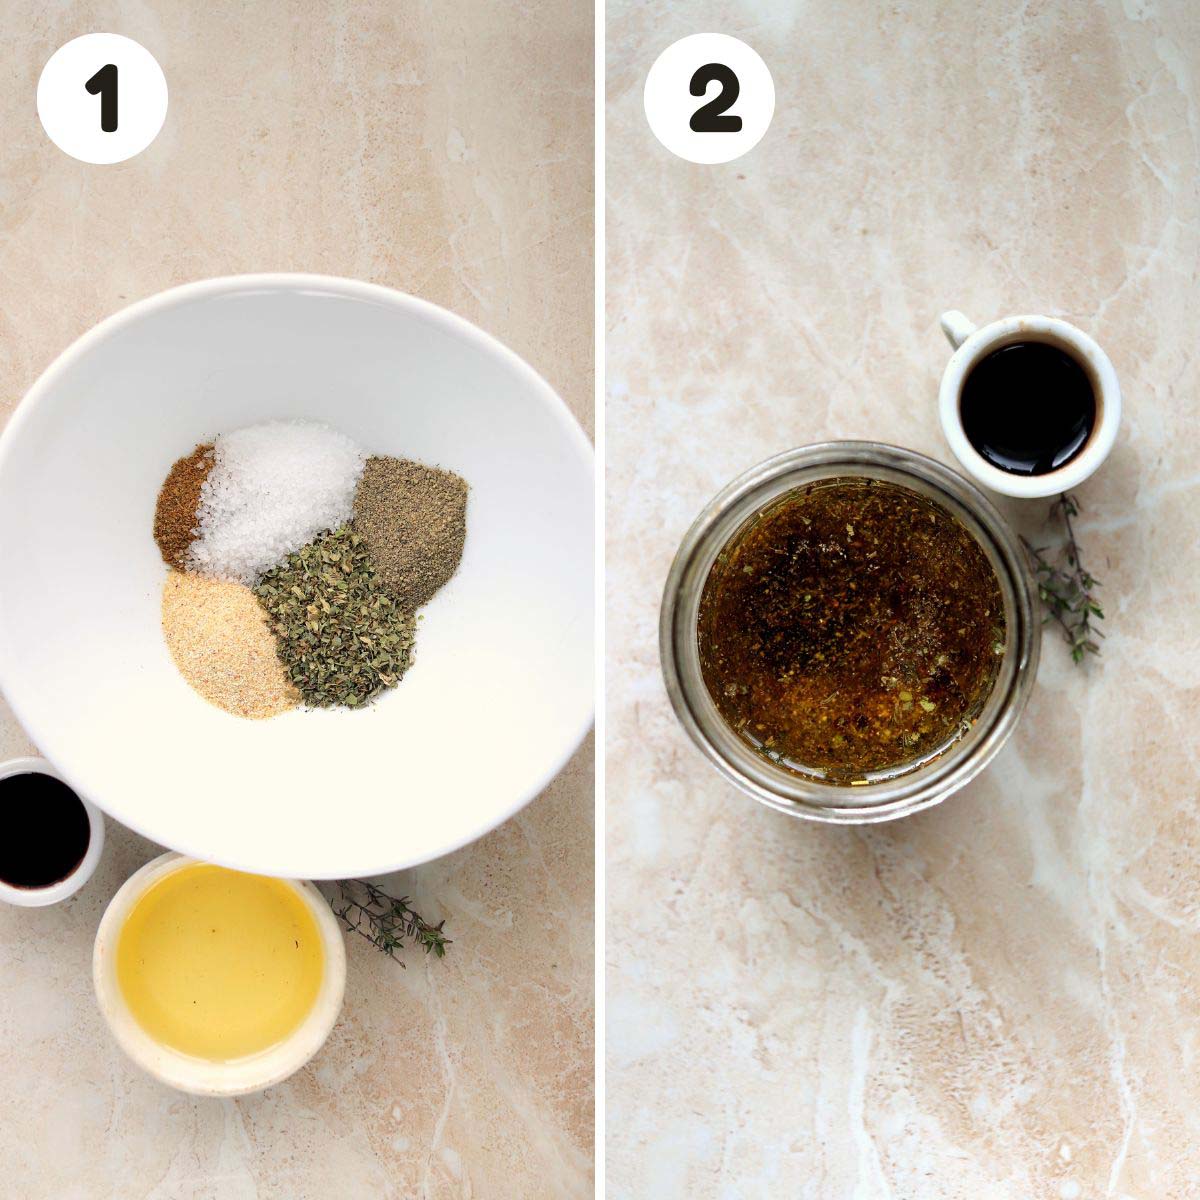 Steps to make the herb dressing.